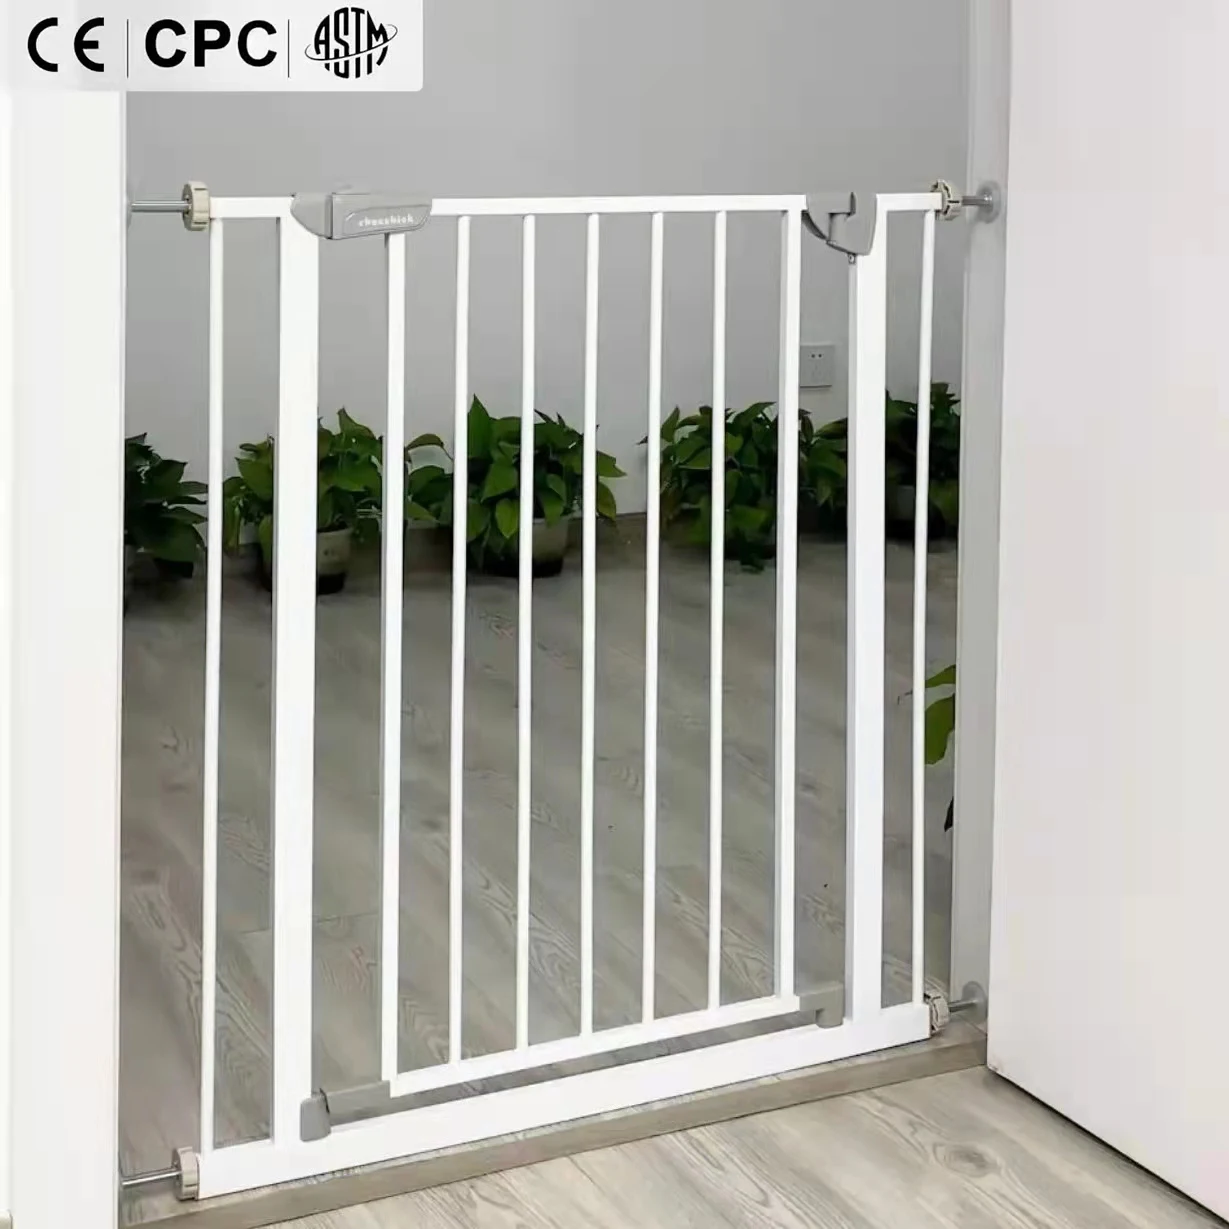 

Chocchick Gates Slim Child Stairs Sale Qatar Adjustable Play Manufacturing Expandable Pressure Safty Store Baby Safety Gate Bed